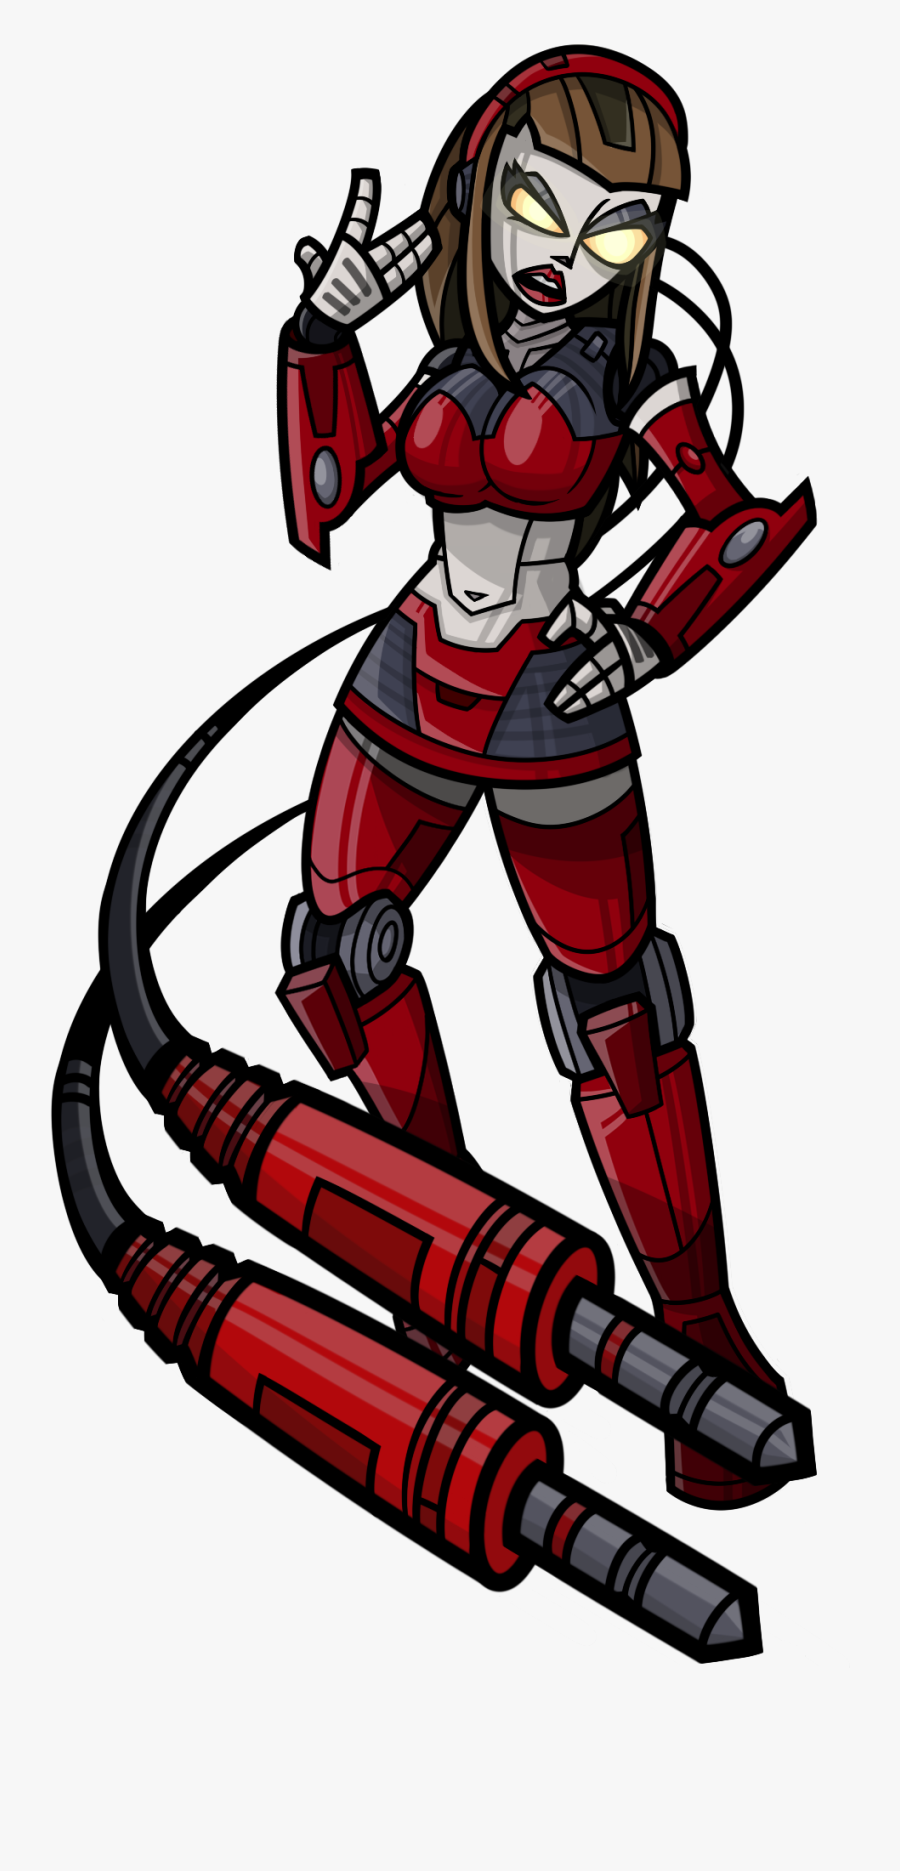 Here"s Some Art Of Courtney Gears From Ratchet & Clank - Ratchet And Clank 3 Courtney Gears, Transparent Clipart